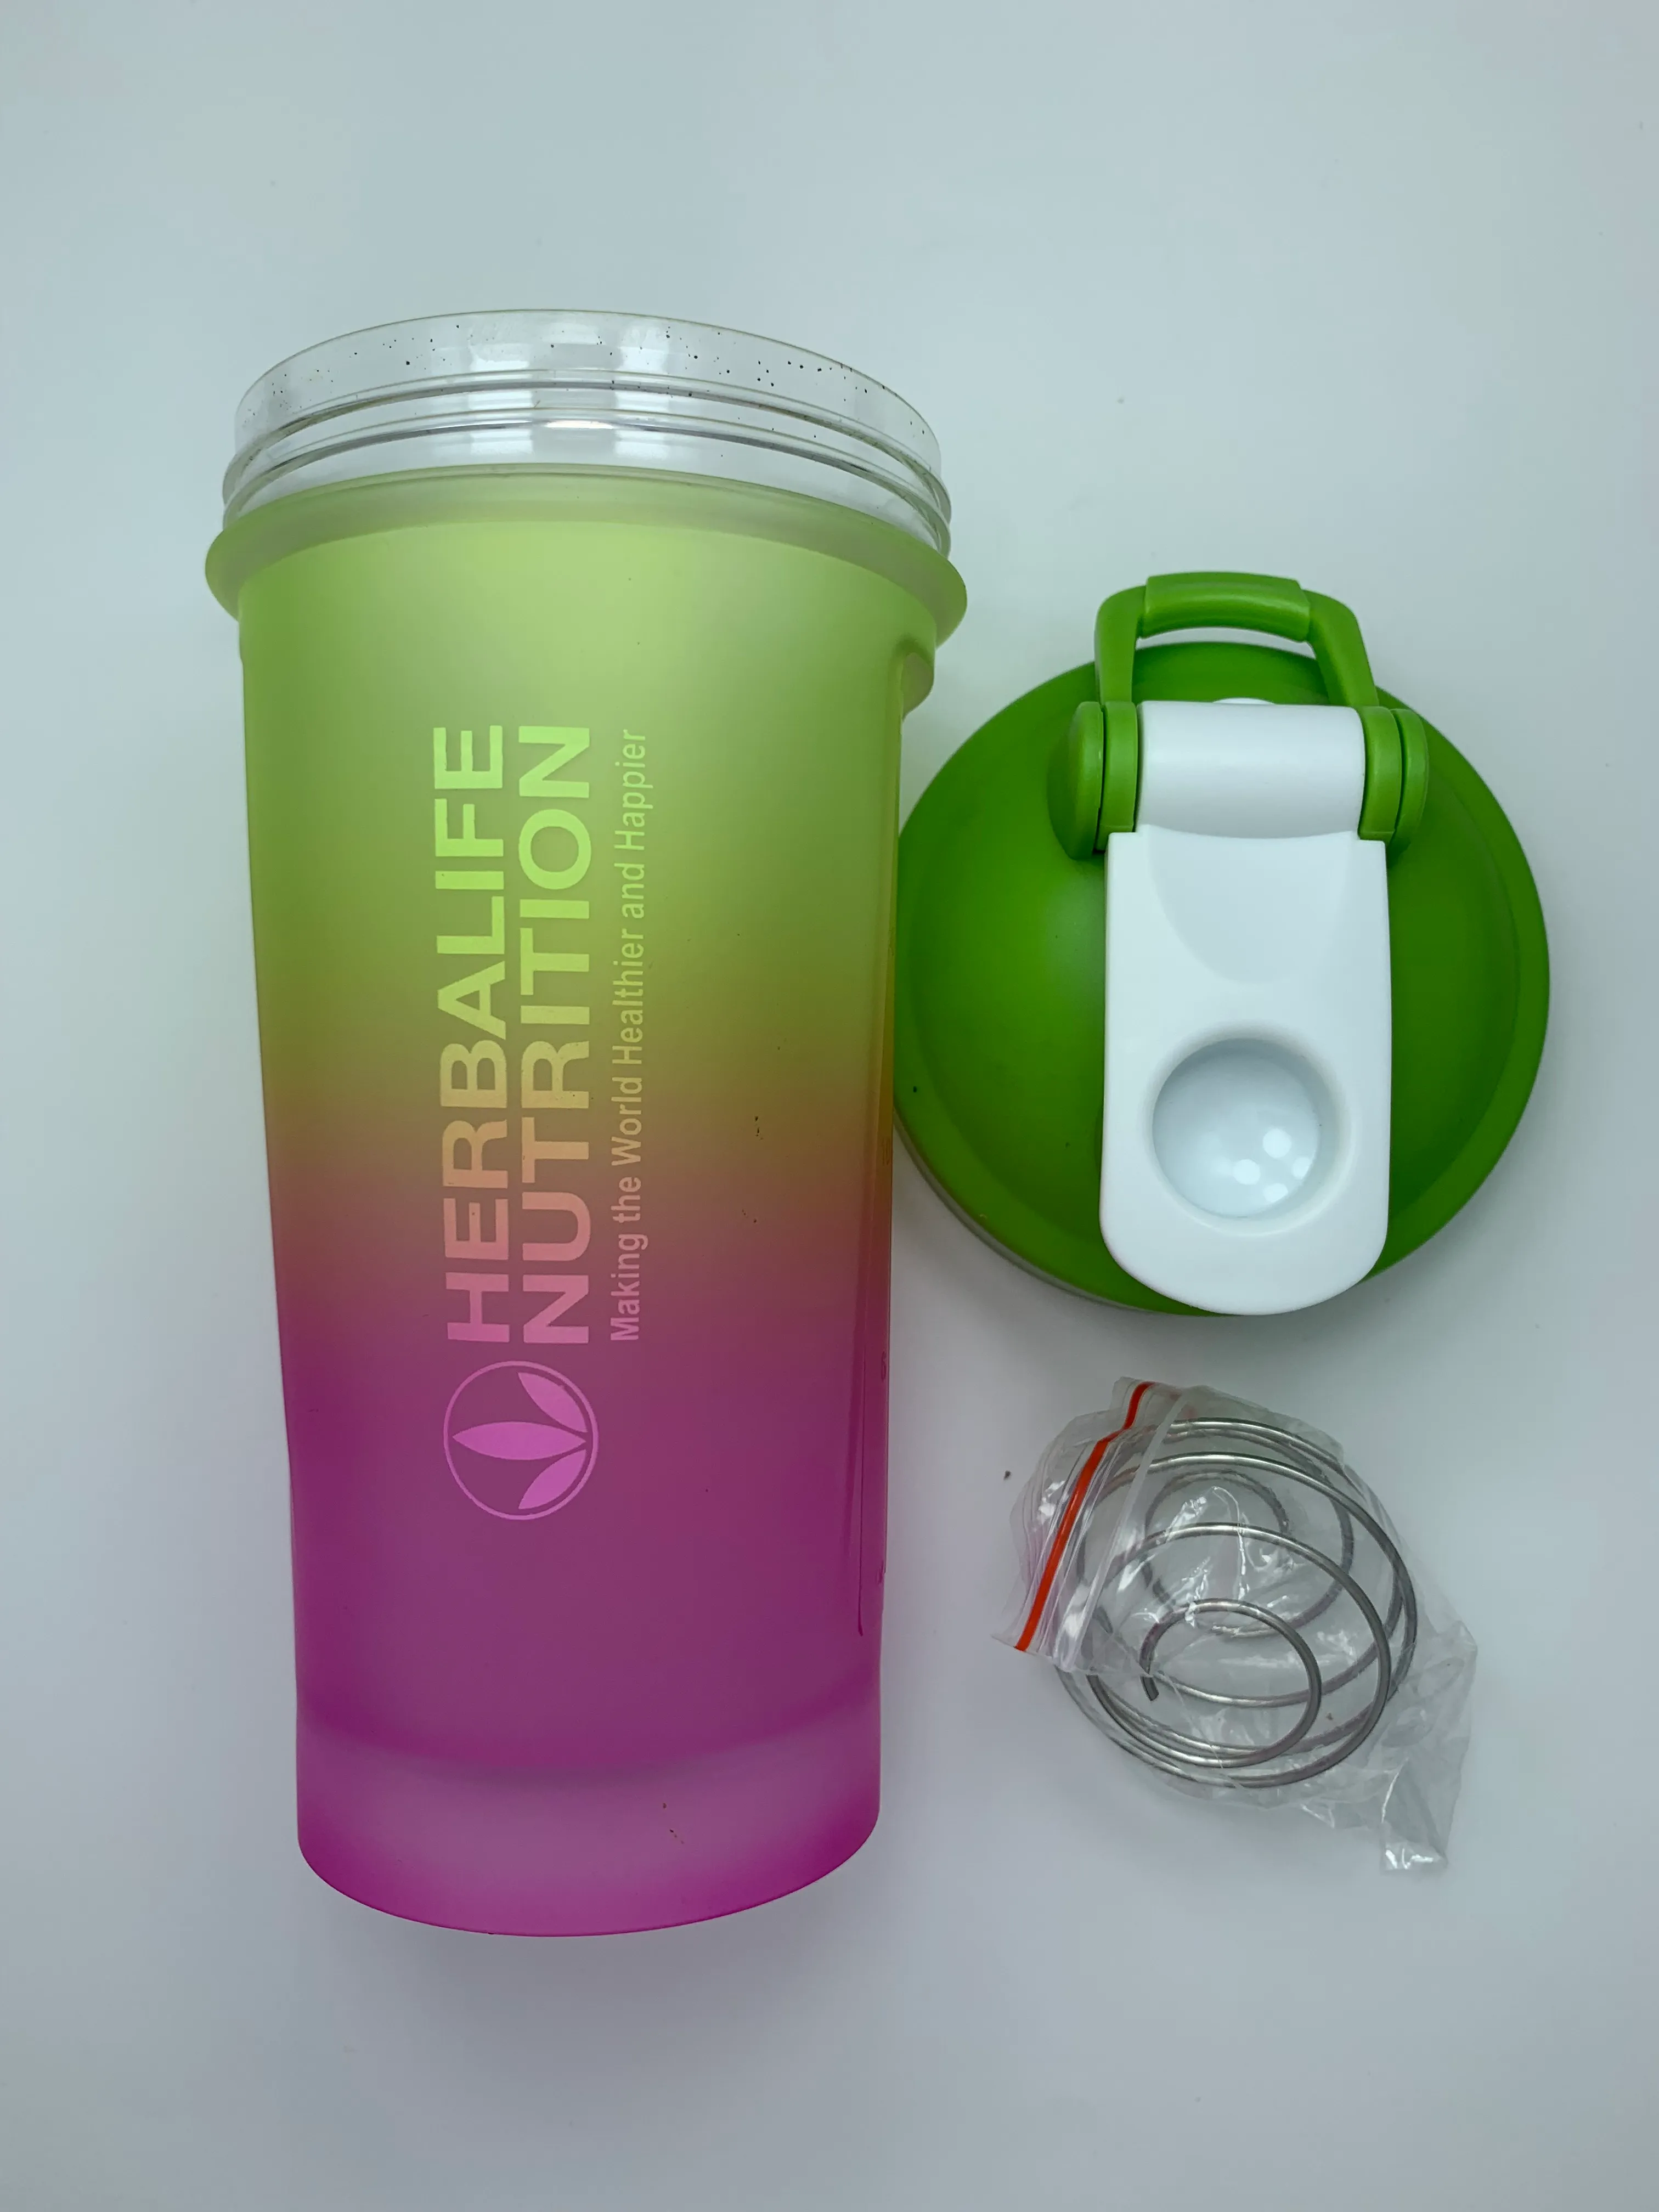 New Arrival 500ml Herbalife Nutrition Shaker Cup Portable Bottle Gradient  Colors From Ebetter001, $12.07